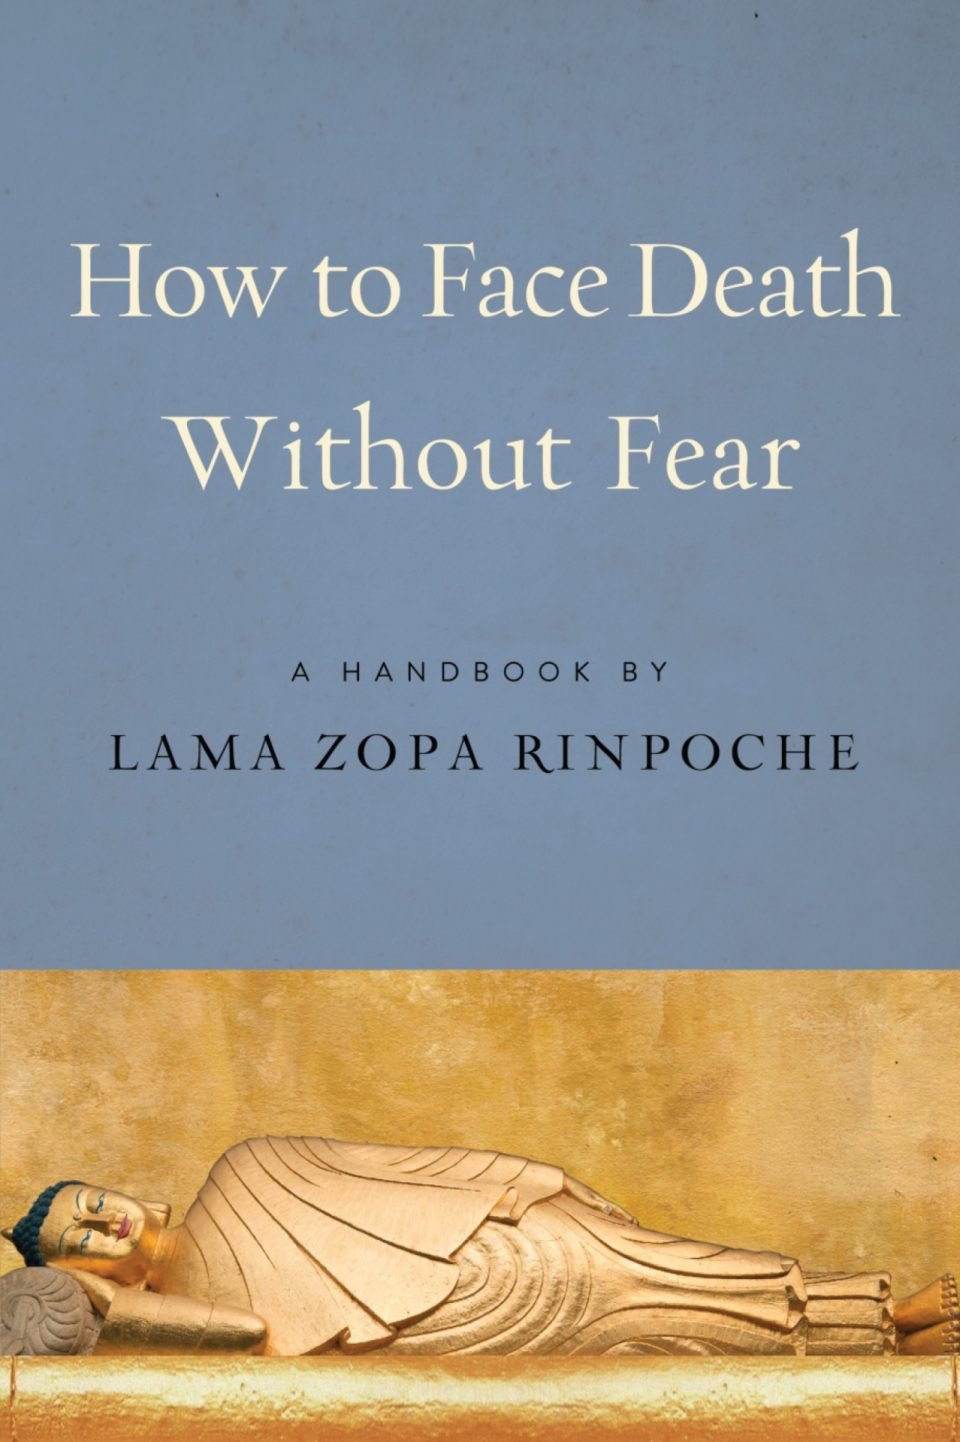 The book's cover has an image of the Buddha laying on his side in the lion's pose.